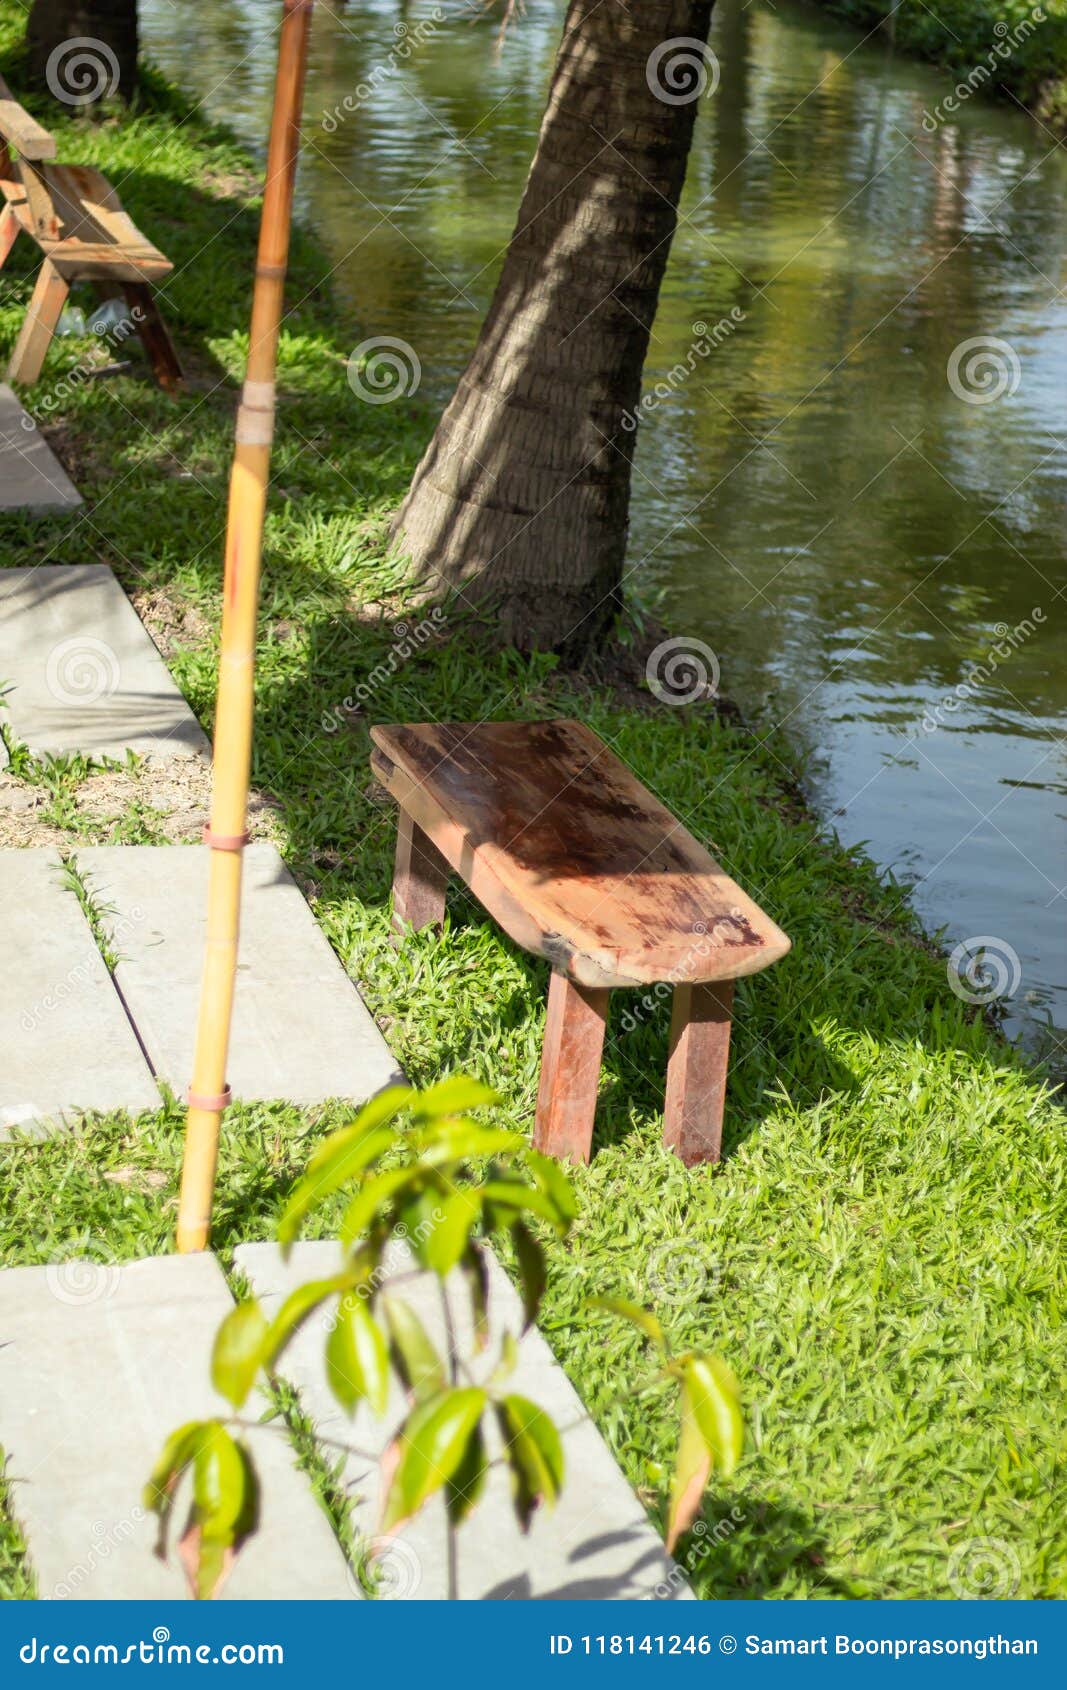 Old Wooden Chairs And Cement Block Floor A Walk Stock Photo